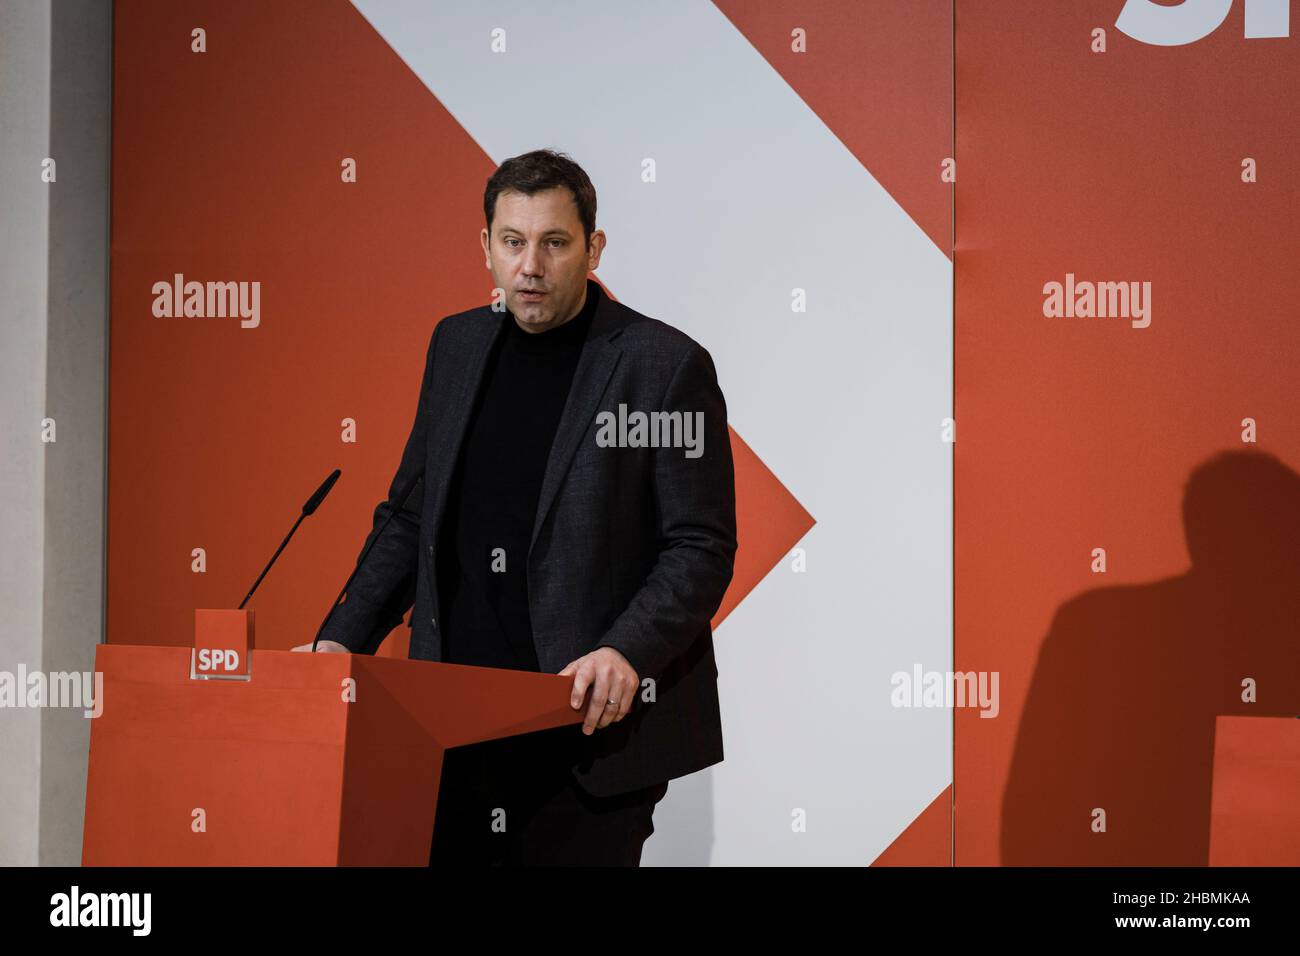 Berlin, Germany. 20th Dec, 2021. Lars Klingbeil at the press conference of the Social Democratic Party in Berlin on December 20, 2021. (Photo by Ralph Pache/PRESSCOV/Sipa USA) Credit: Sipa US/Alamy Live News Stock Photo